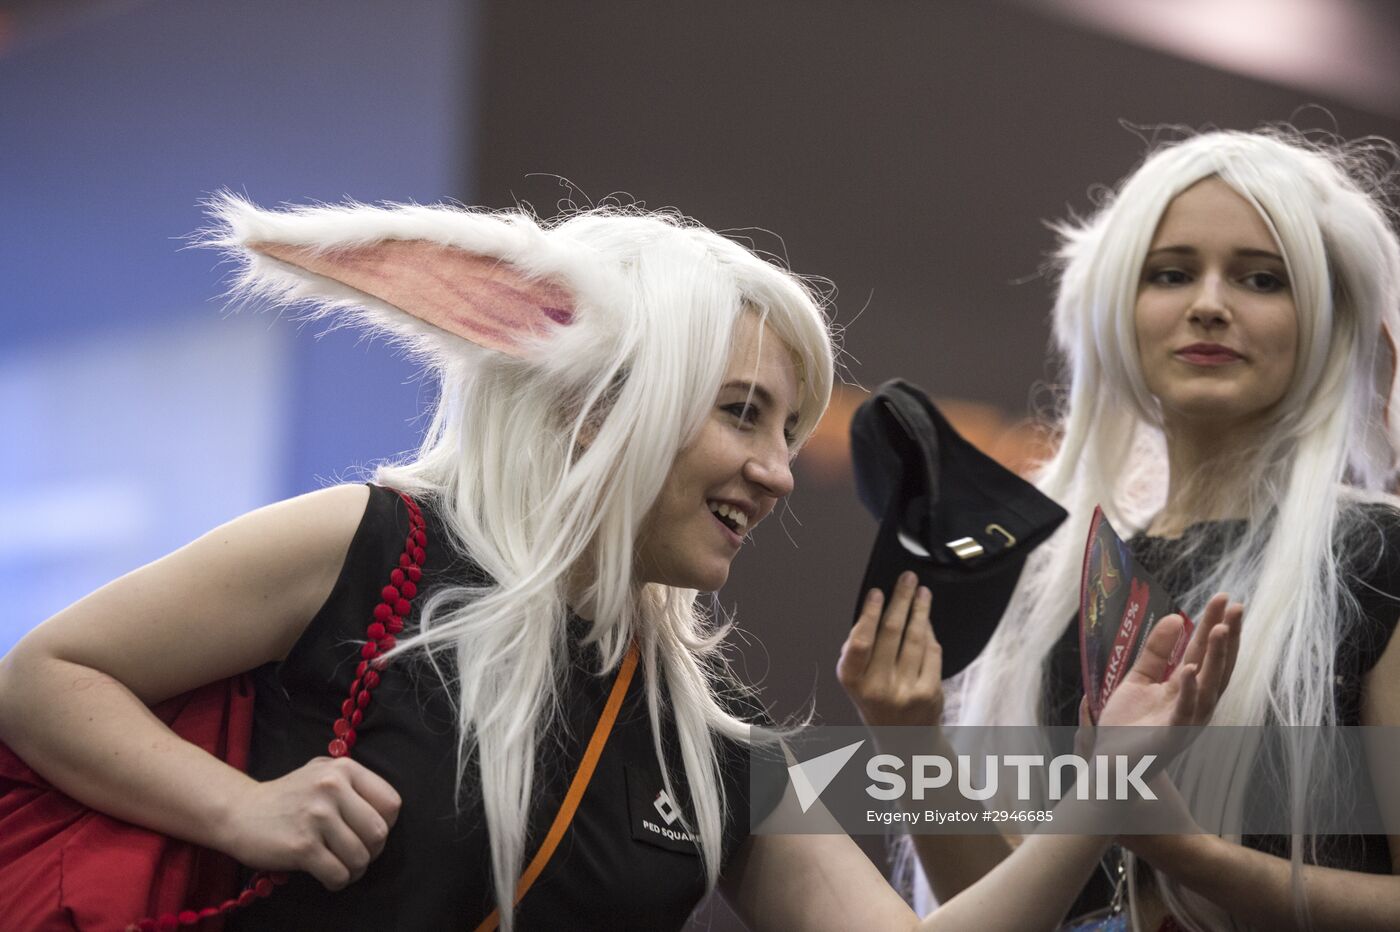 Third annual Comic Con Russia festival and interactive activities exhibition "IgroMir 2016"